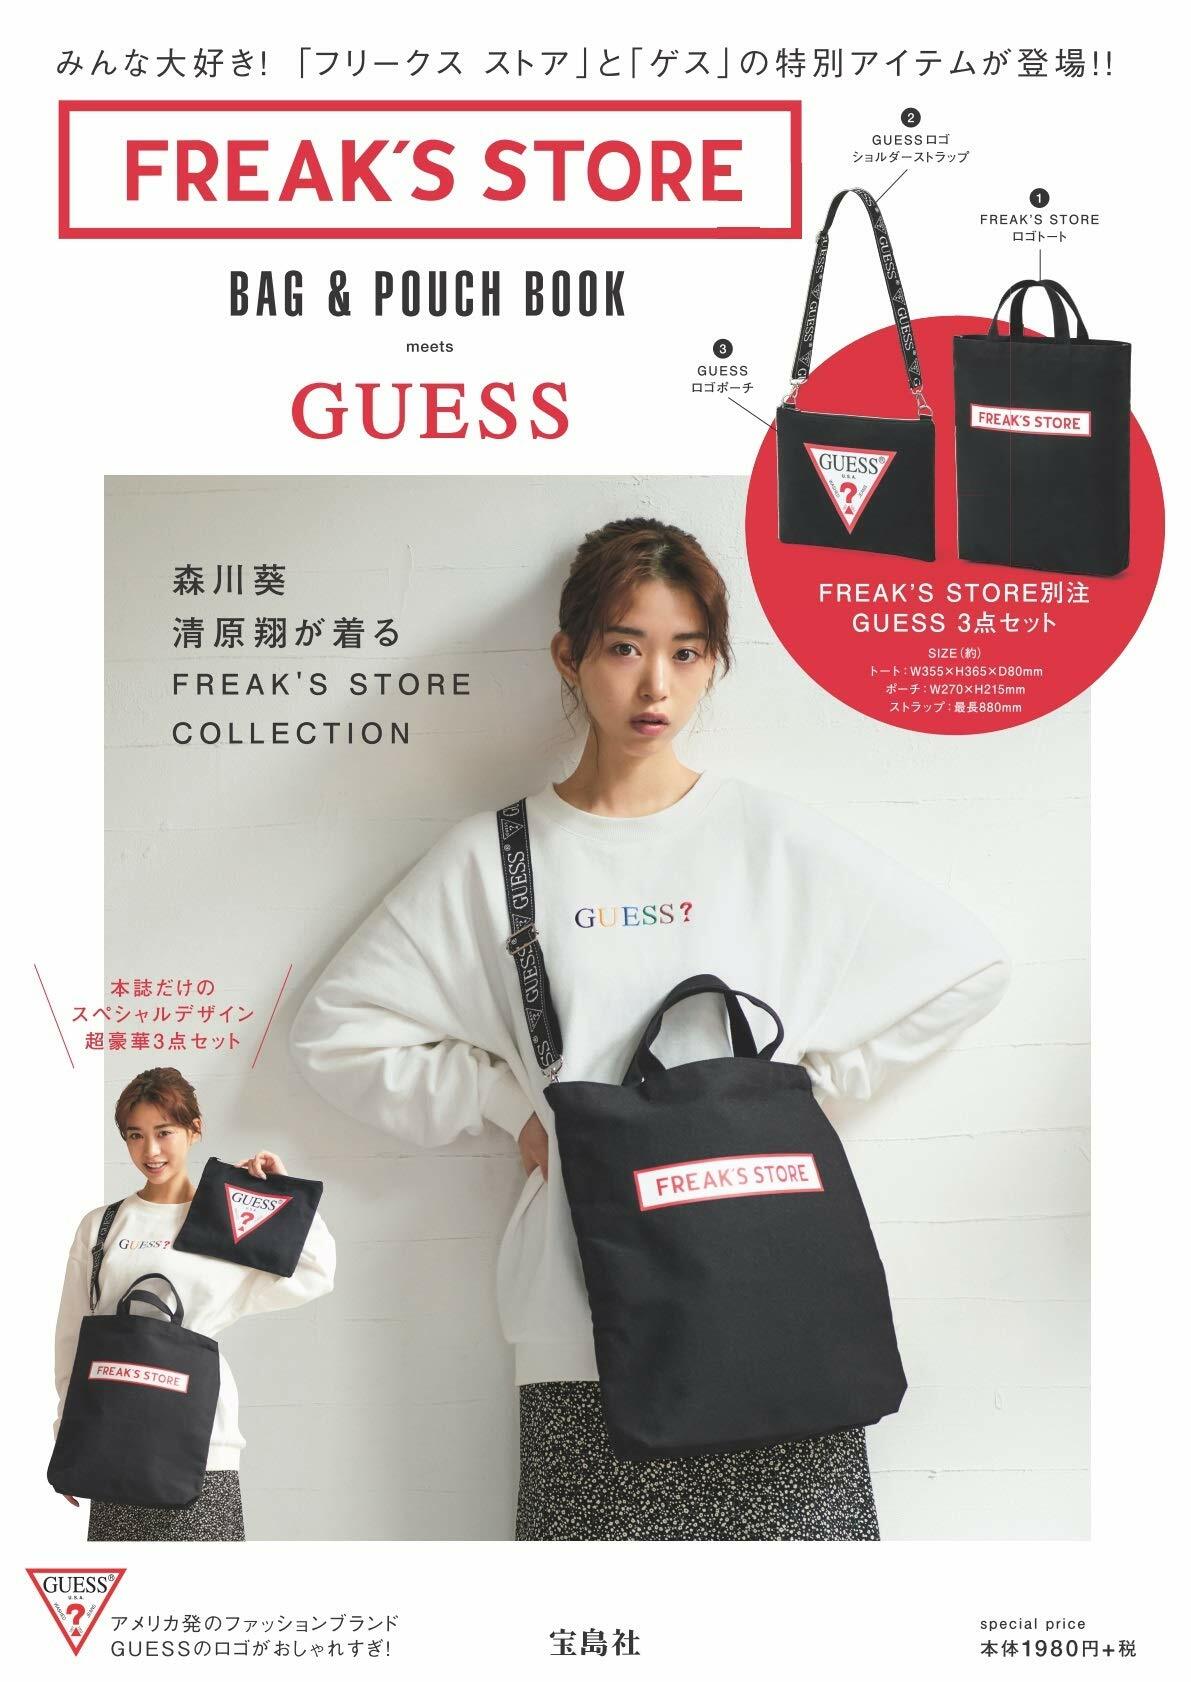 FREAKS STORE BAG & POUCH BOOK meets GUESS